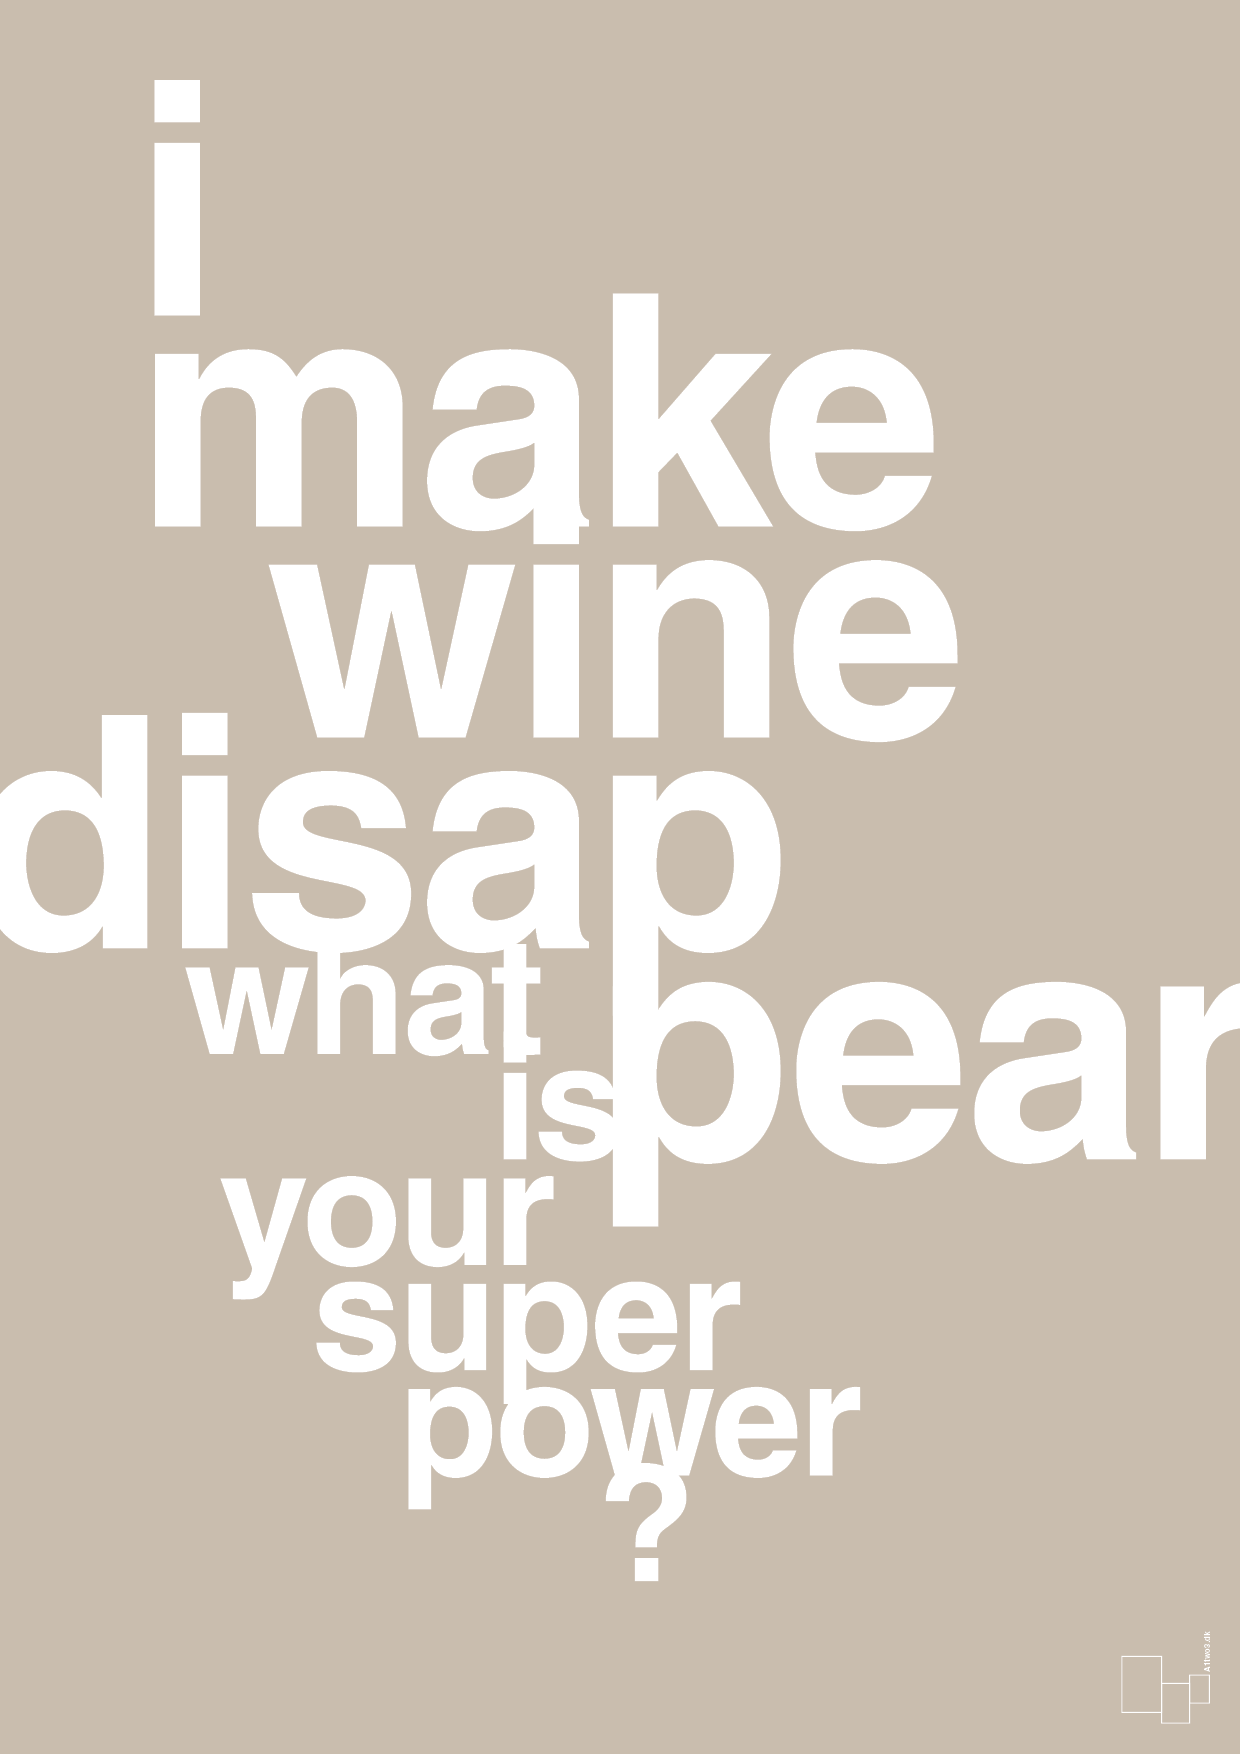 i make wine disappear what is your super power - Plakat med Mad & Drikke i Creamy Mushroom